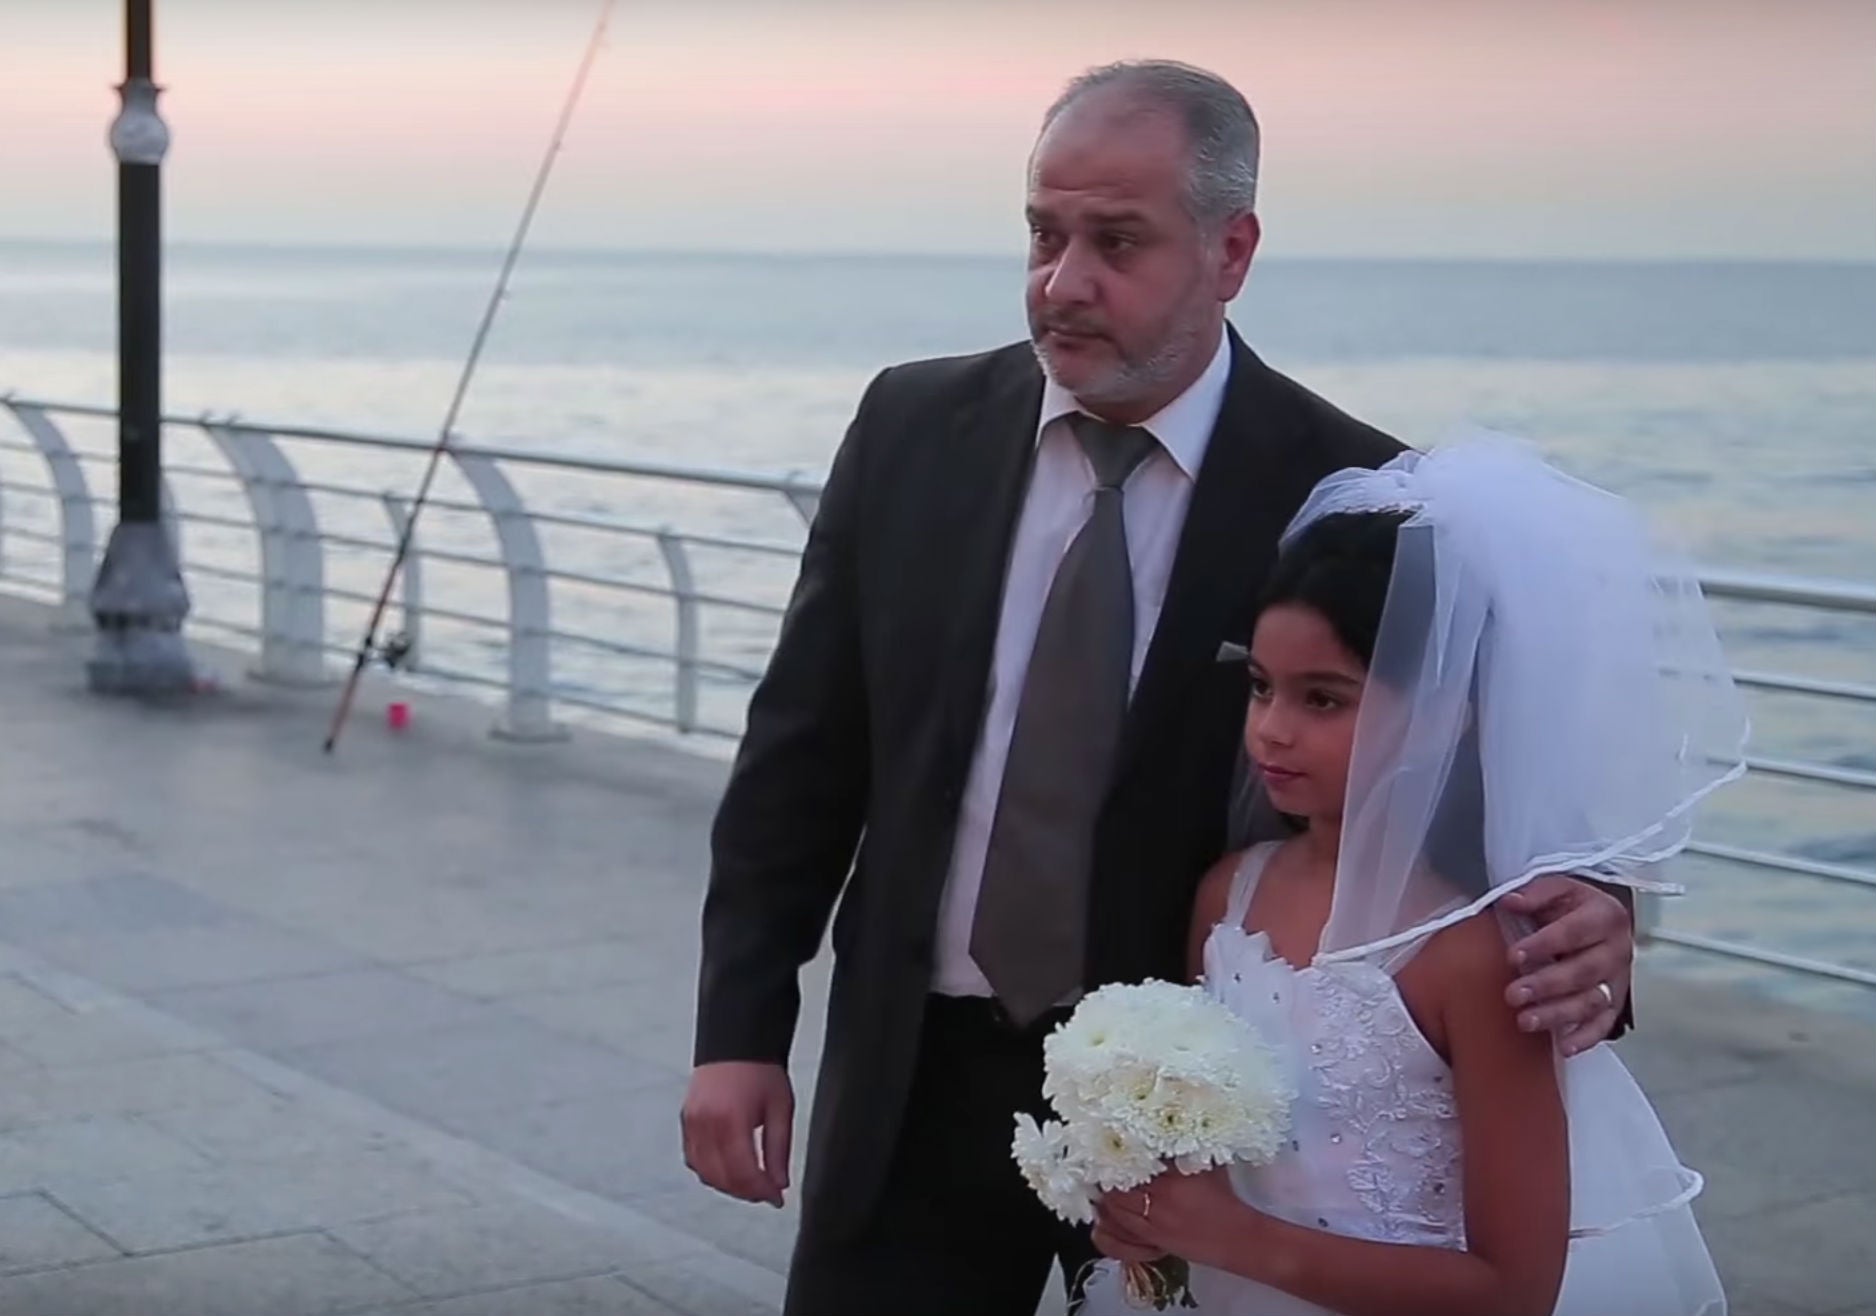 Video of child bride in Lebanon shines spotlight on 37,000 child marriages every day The Independent The Independent